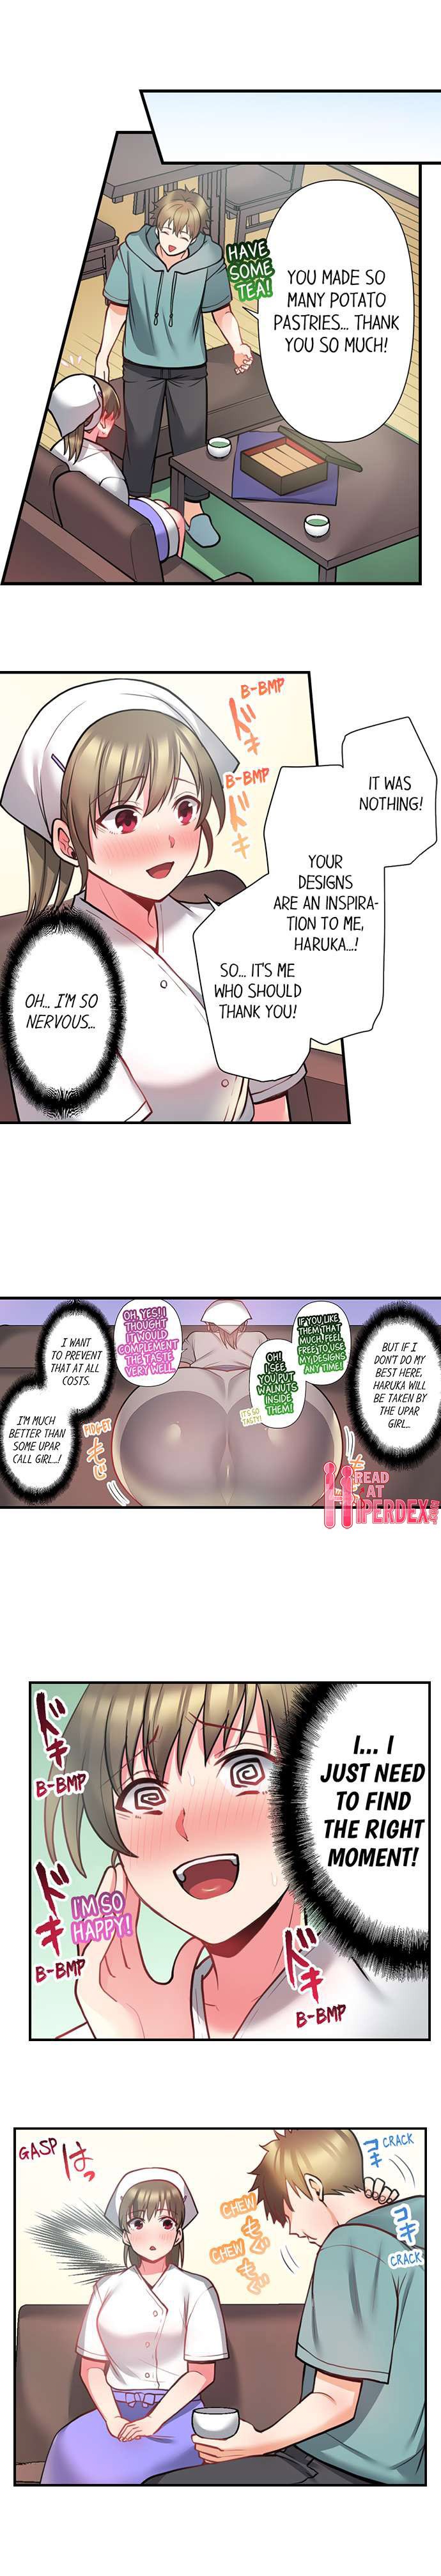 Xem ảnh Bike Delivery Girl, Cumming To Your Door Raw - Chapter 22 - EAb0kETppYkpLkc - Hentai24h.Tv